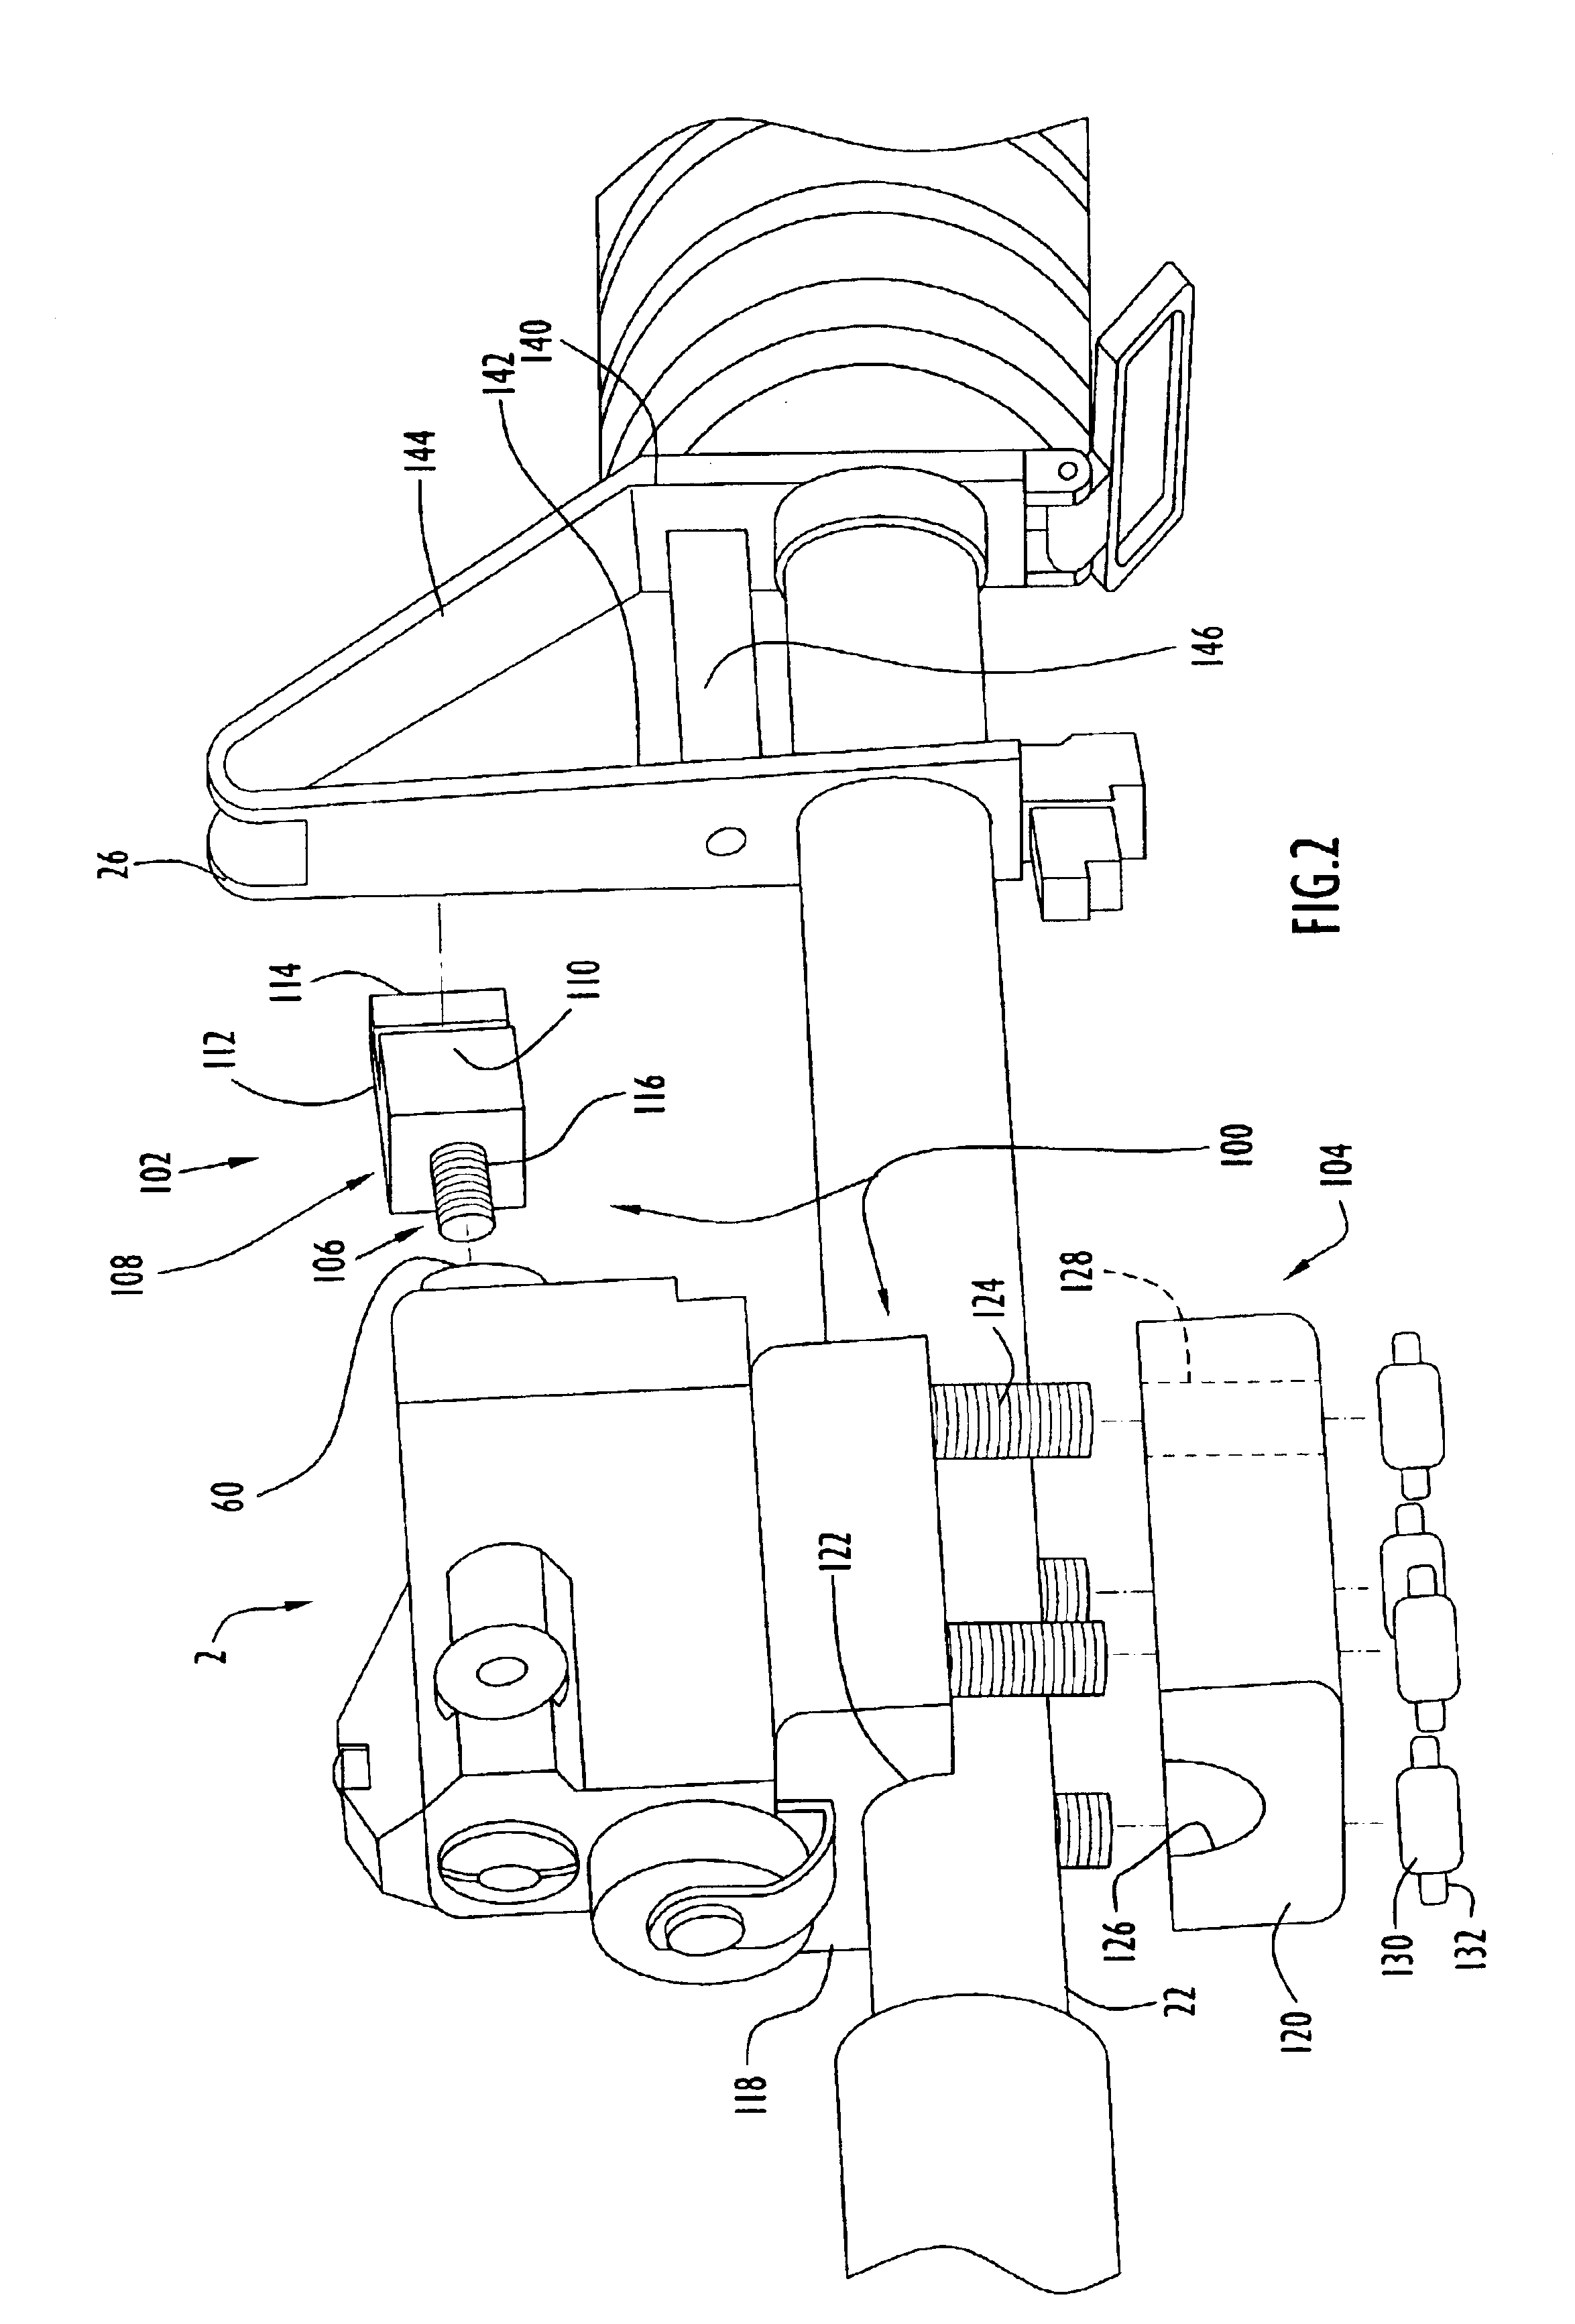 Firearm laser training system and method employing modified blank cartridges for simulating operation of a firearm